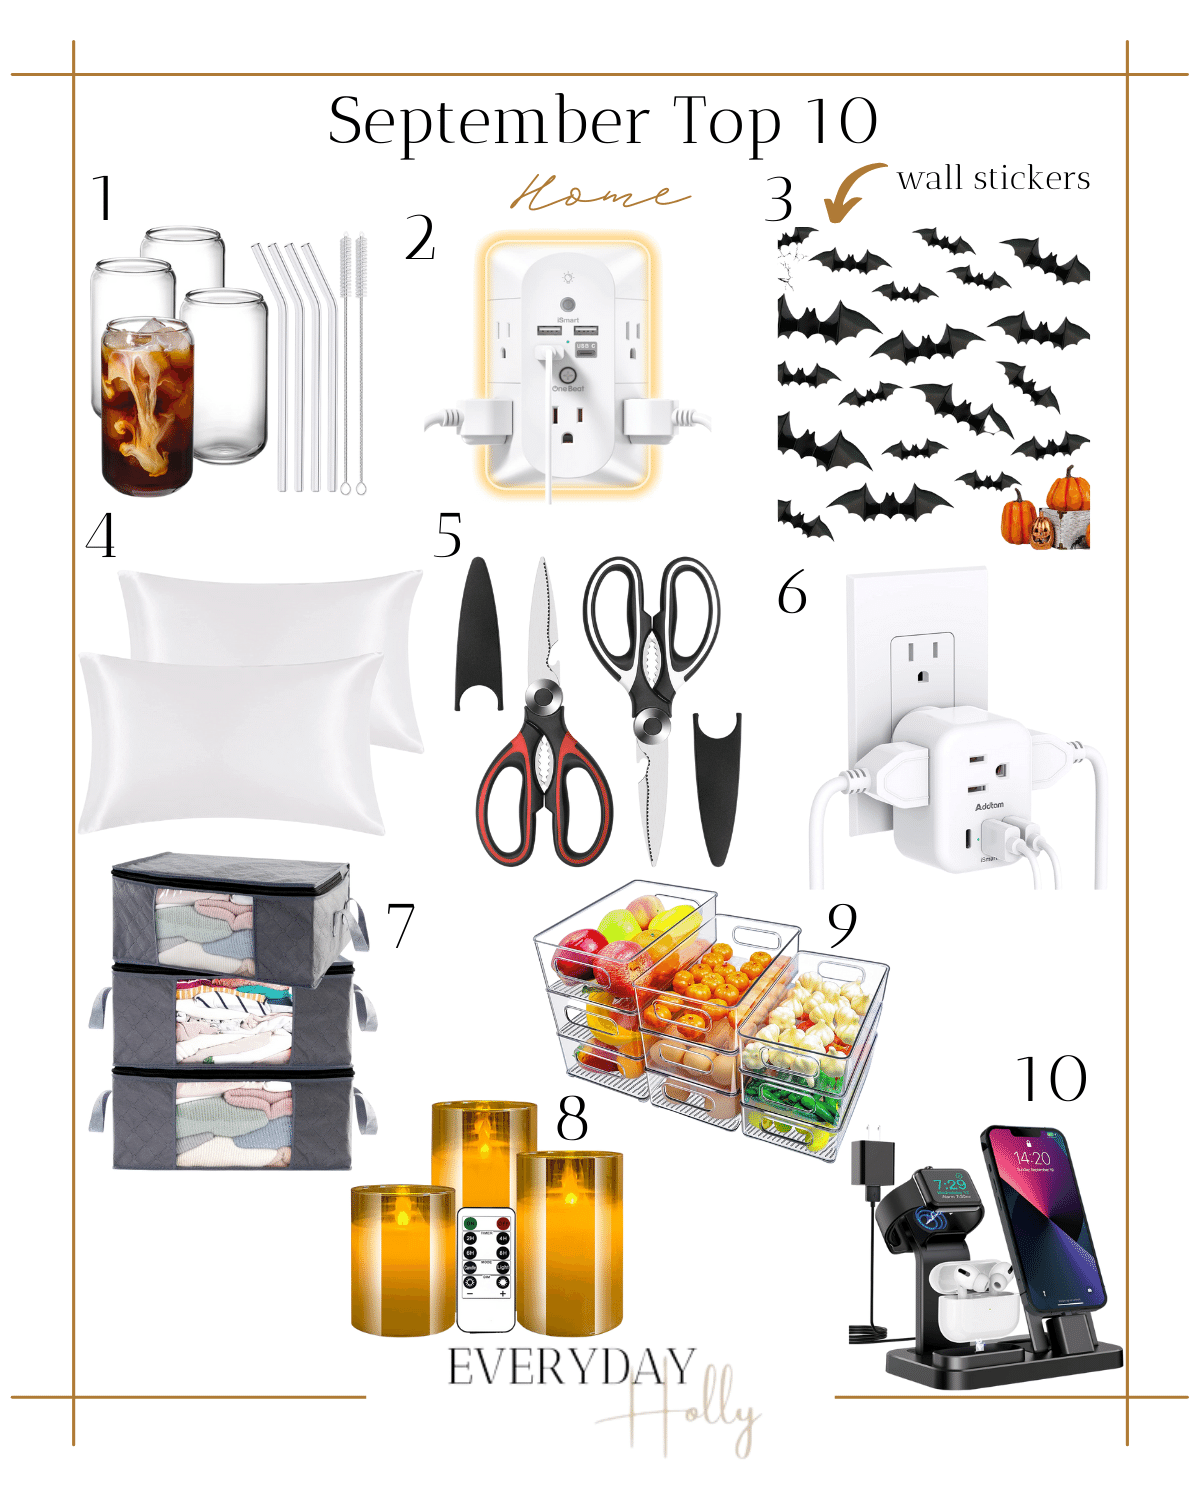 glass cups with straws, surge protector with multiple charging ports, bar wall stickers, silk pillow cases, heavy duty food scissors, multiplug outlet, closet storage bins, acrylic fridge storage containers, fridge organization, LED flameless candles, 3 in 1 charging station 